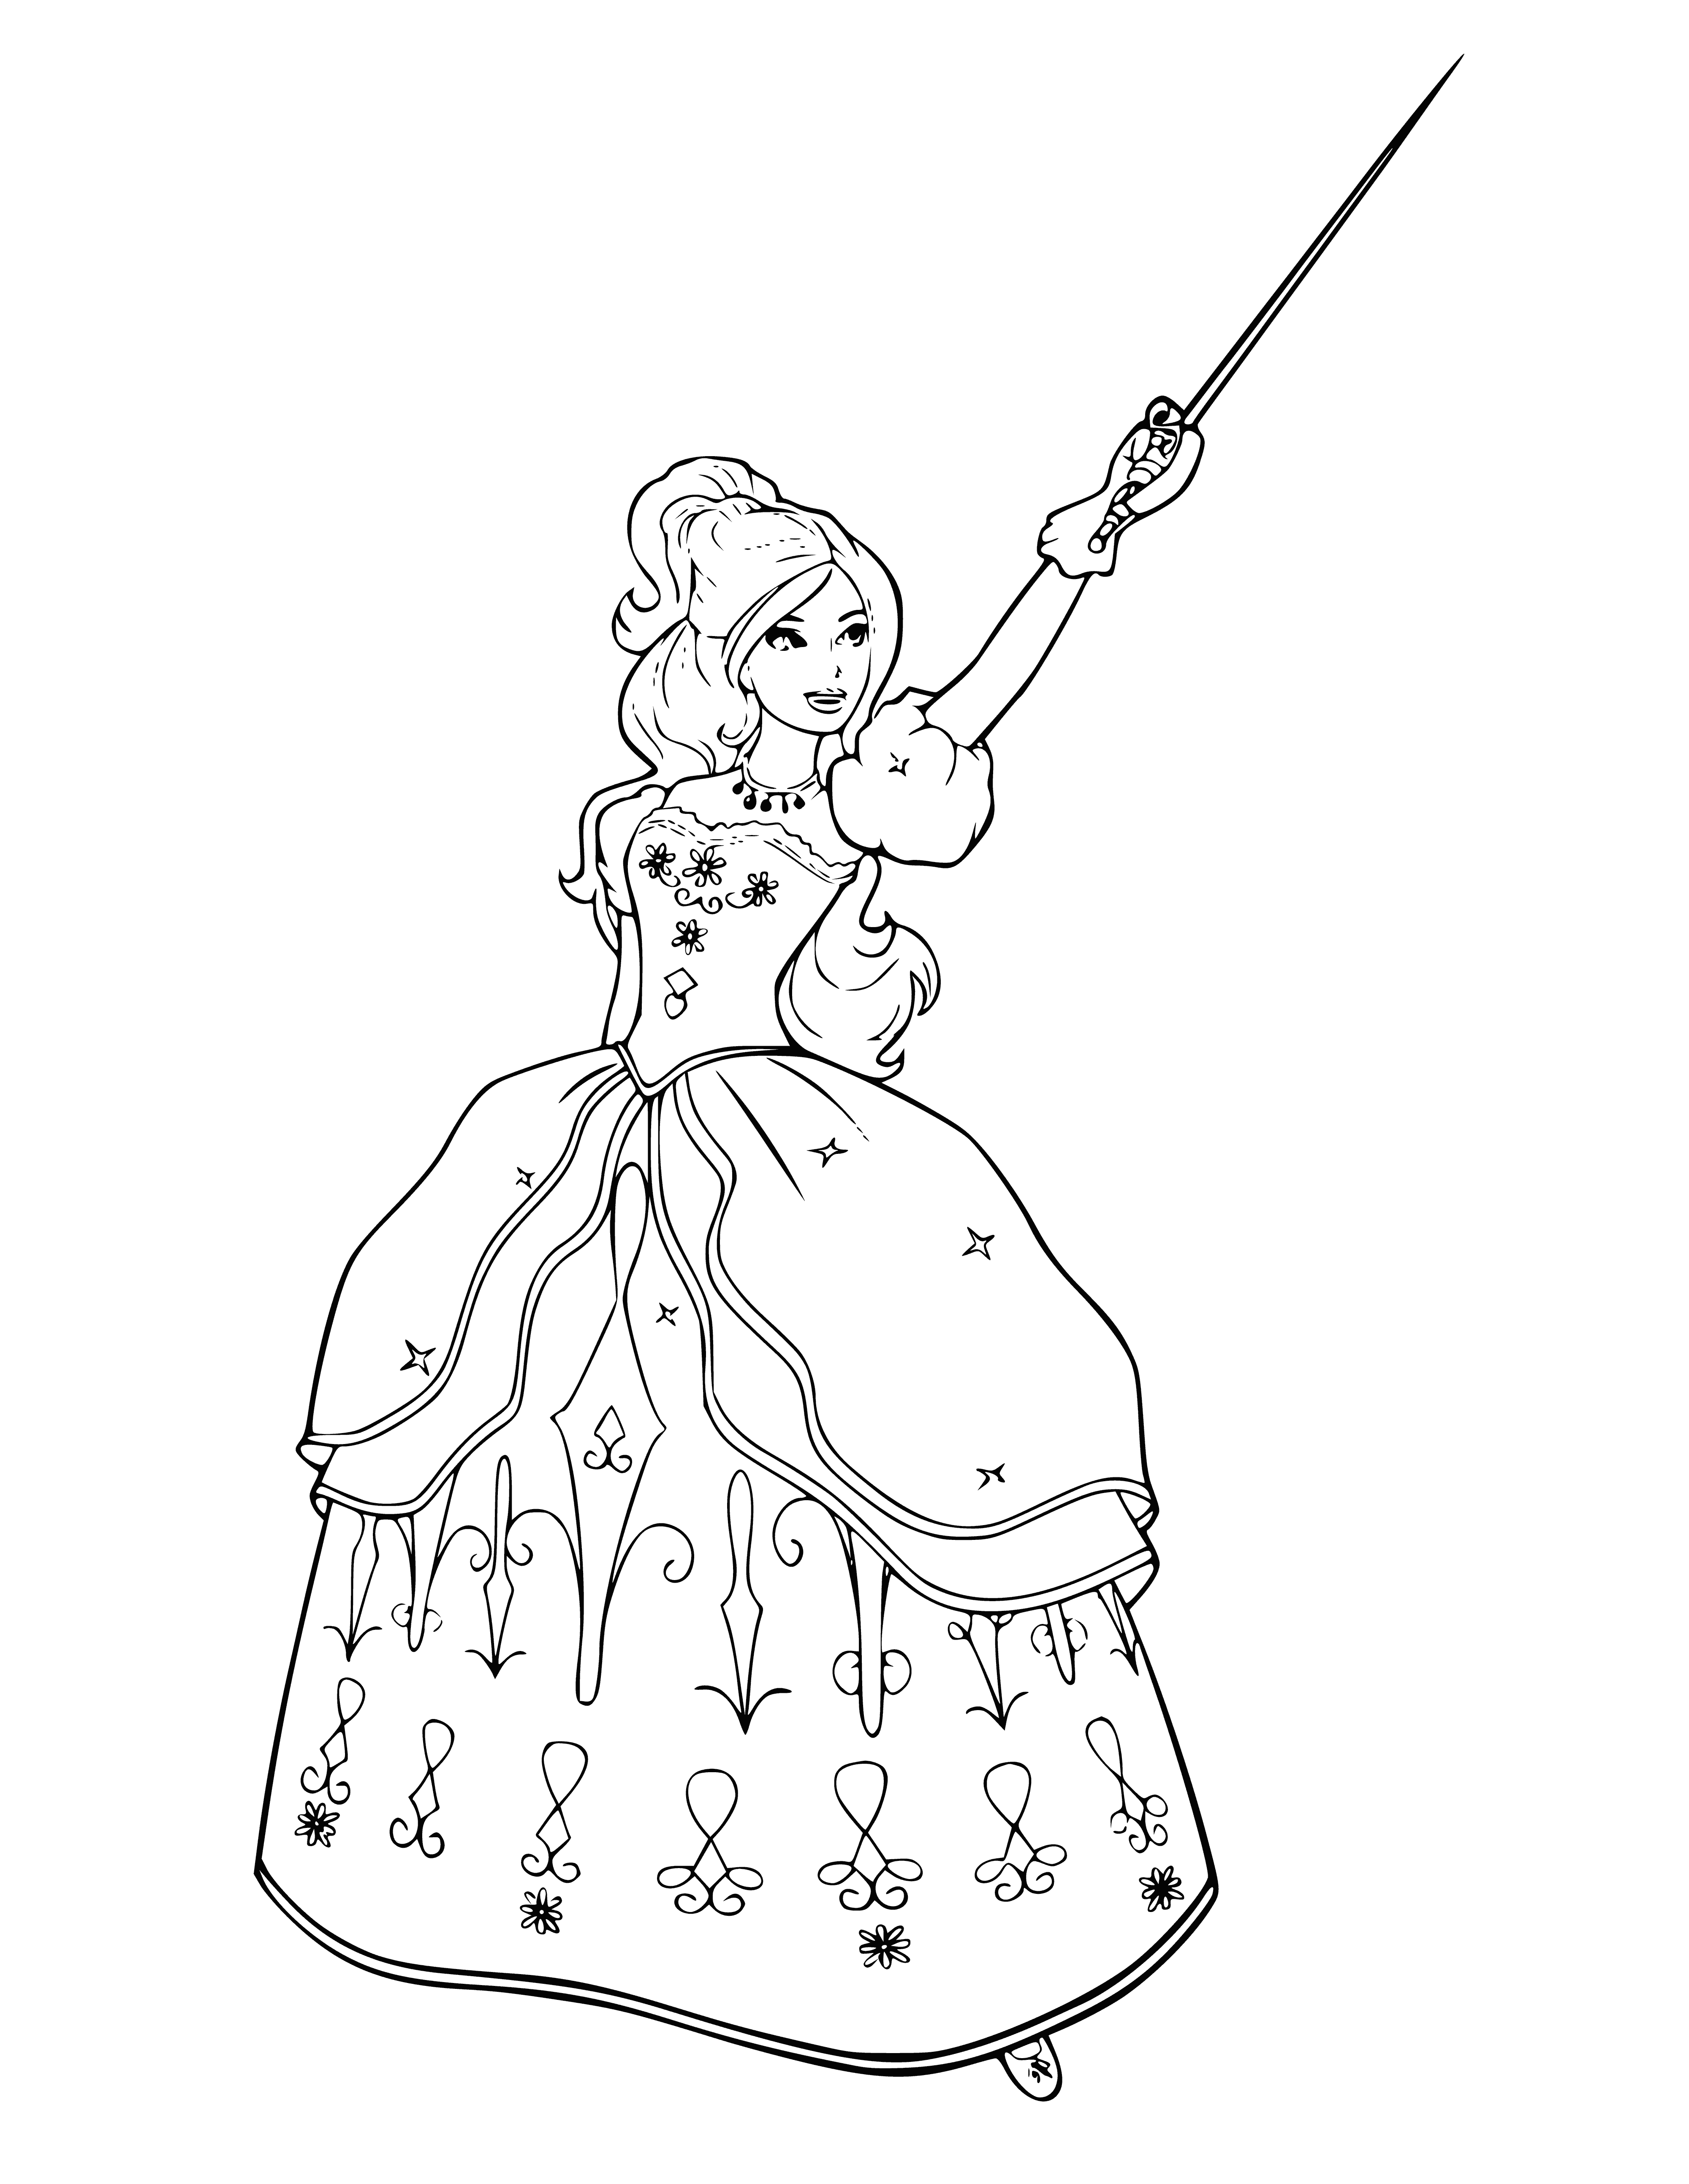 Musketeer girl coloring page